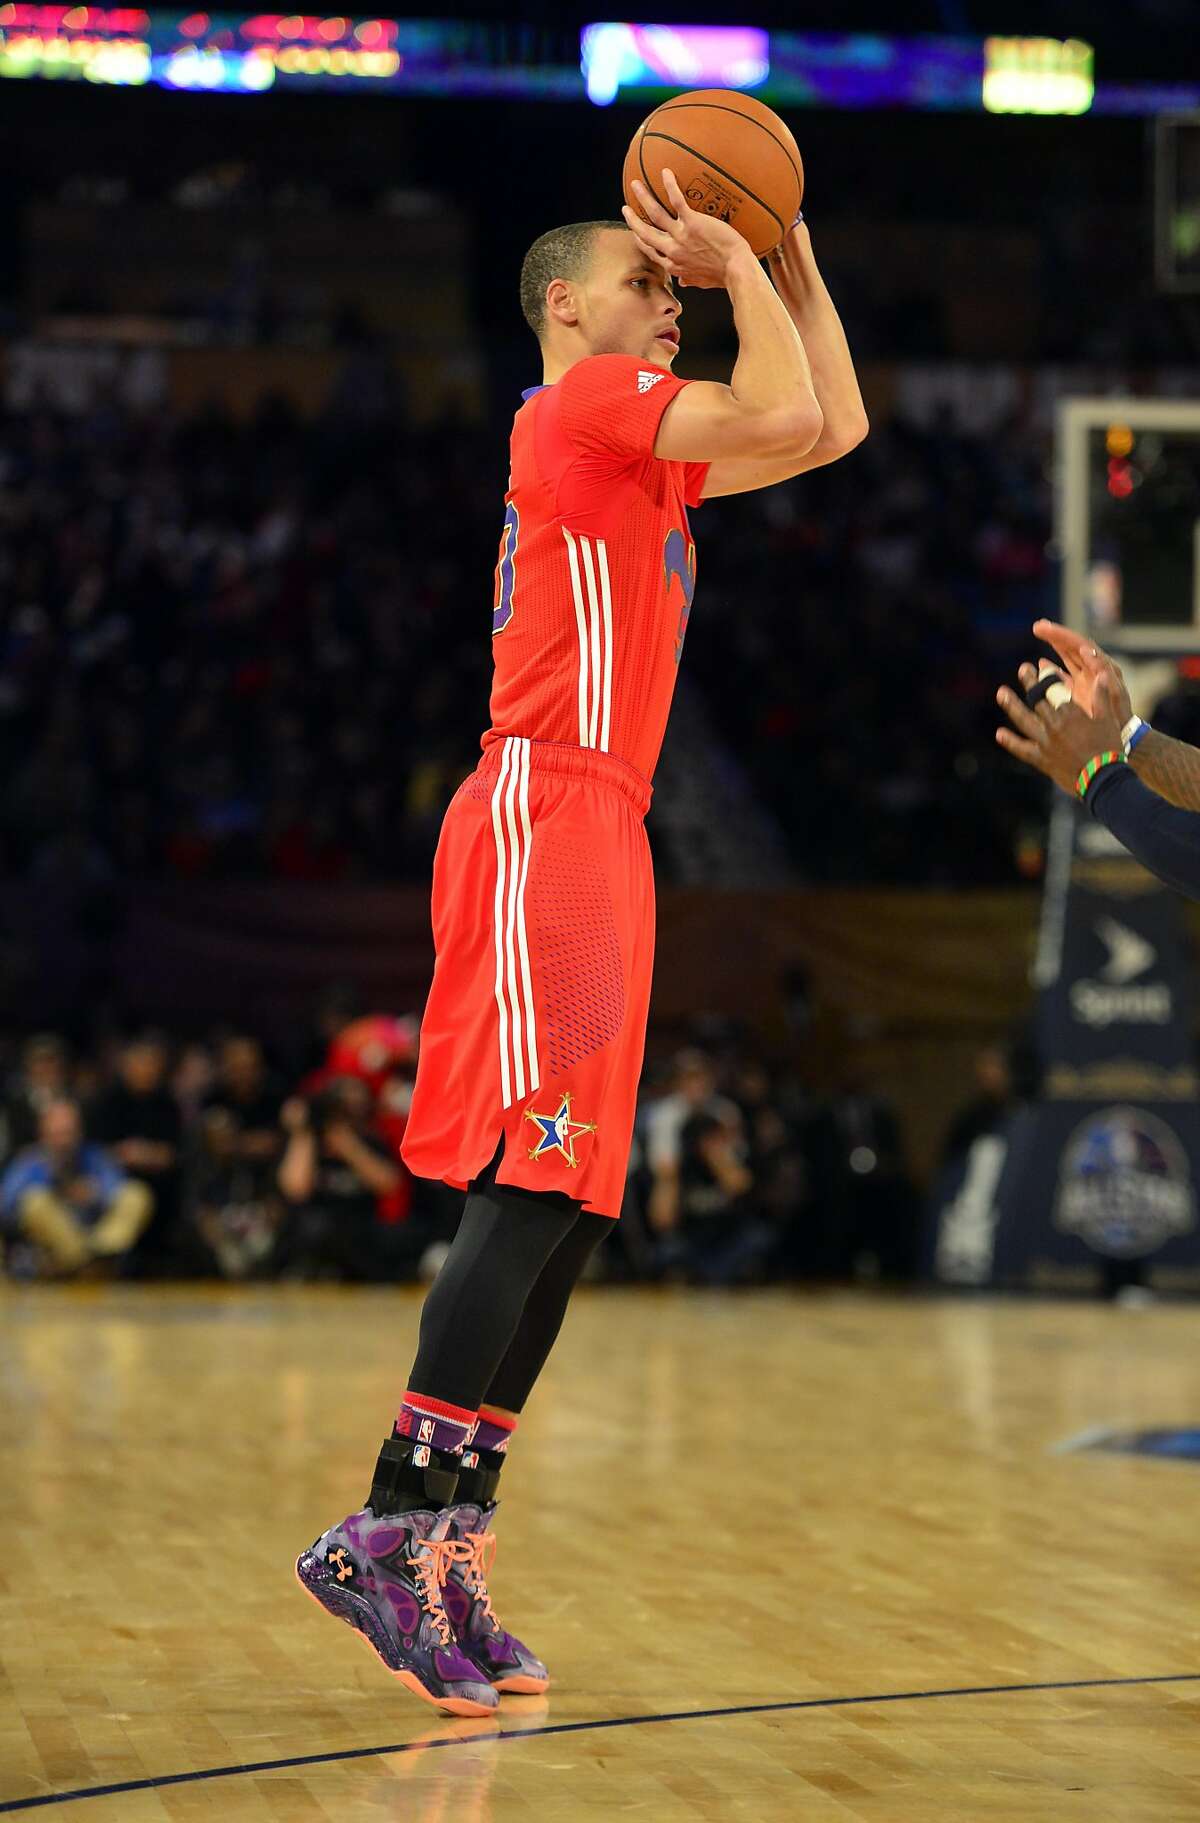 Feb 16, 2014; New Orleans, LA, USA; Western Conference guard Stephen Curry (30) of the Golden State Warriors shoots the ball during the 2014 NBA All-Star Game at the Smoothie King Center. Mandatory Credit: Bob Donnan-USA TODAY Sports